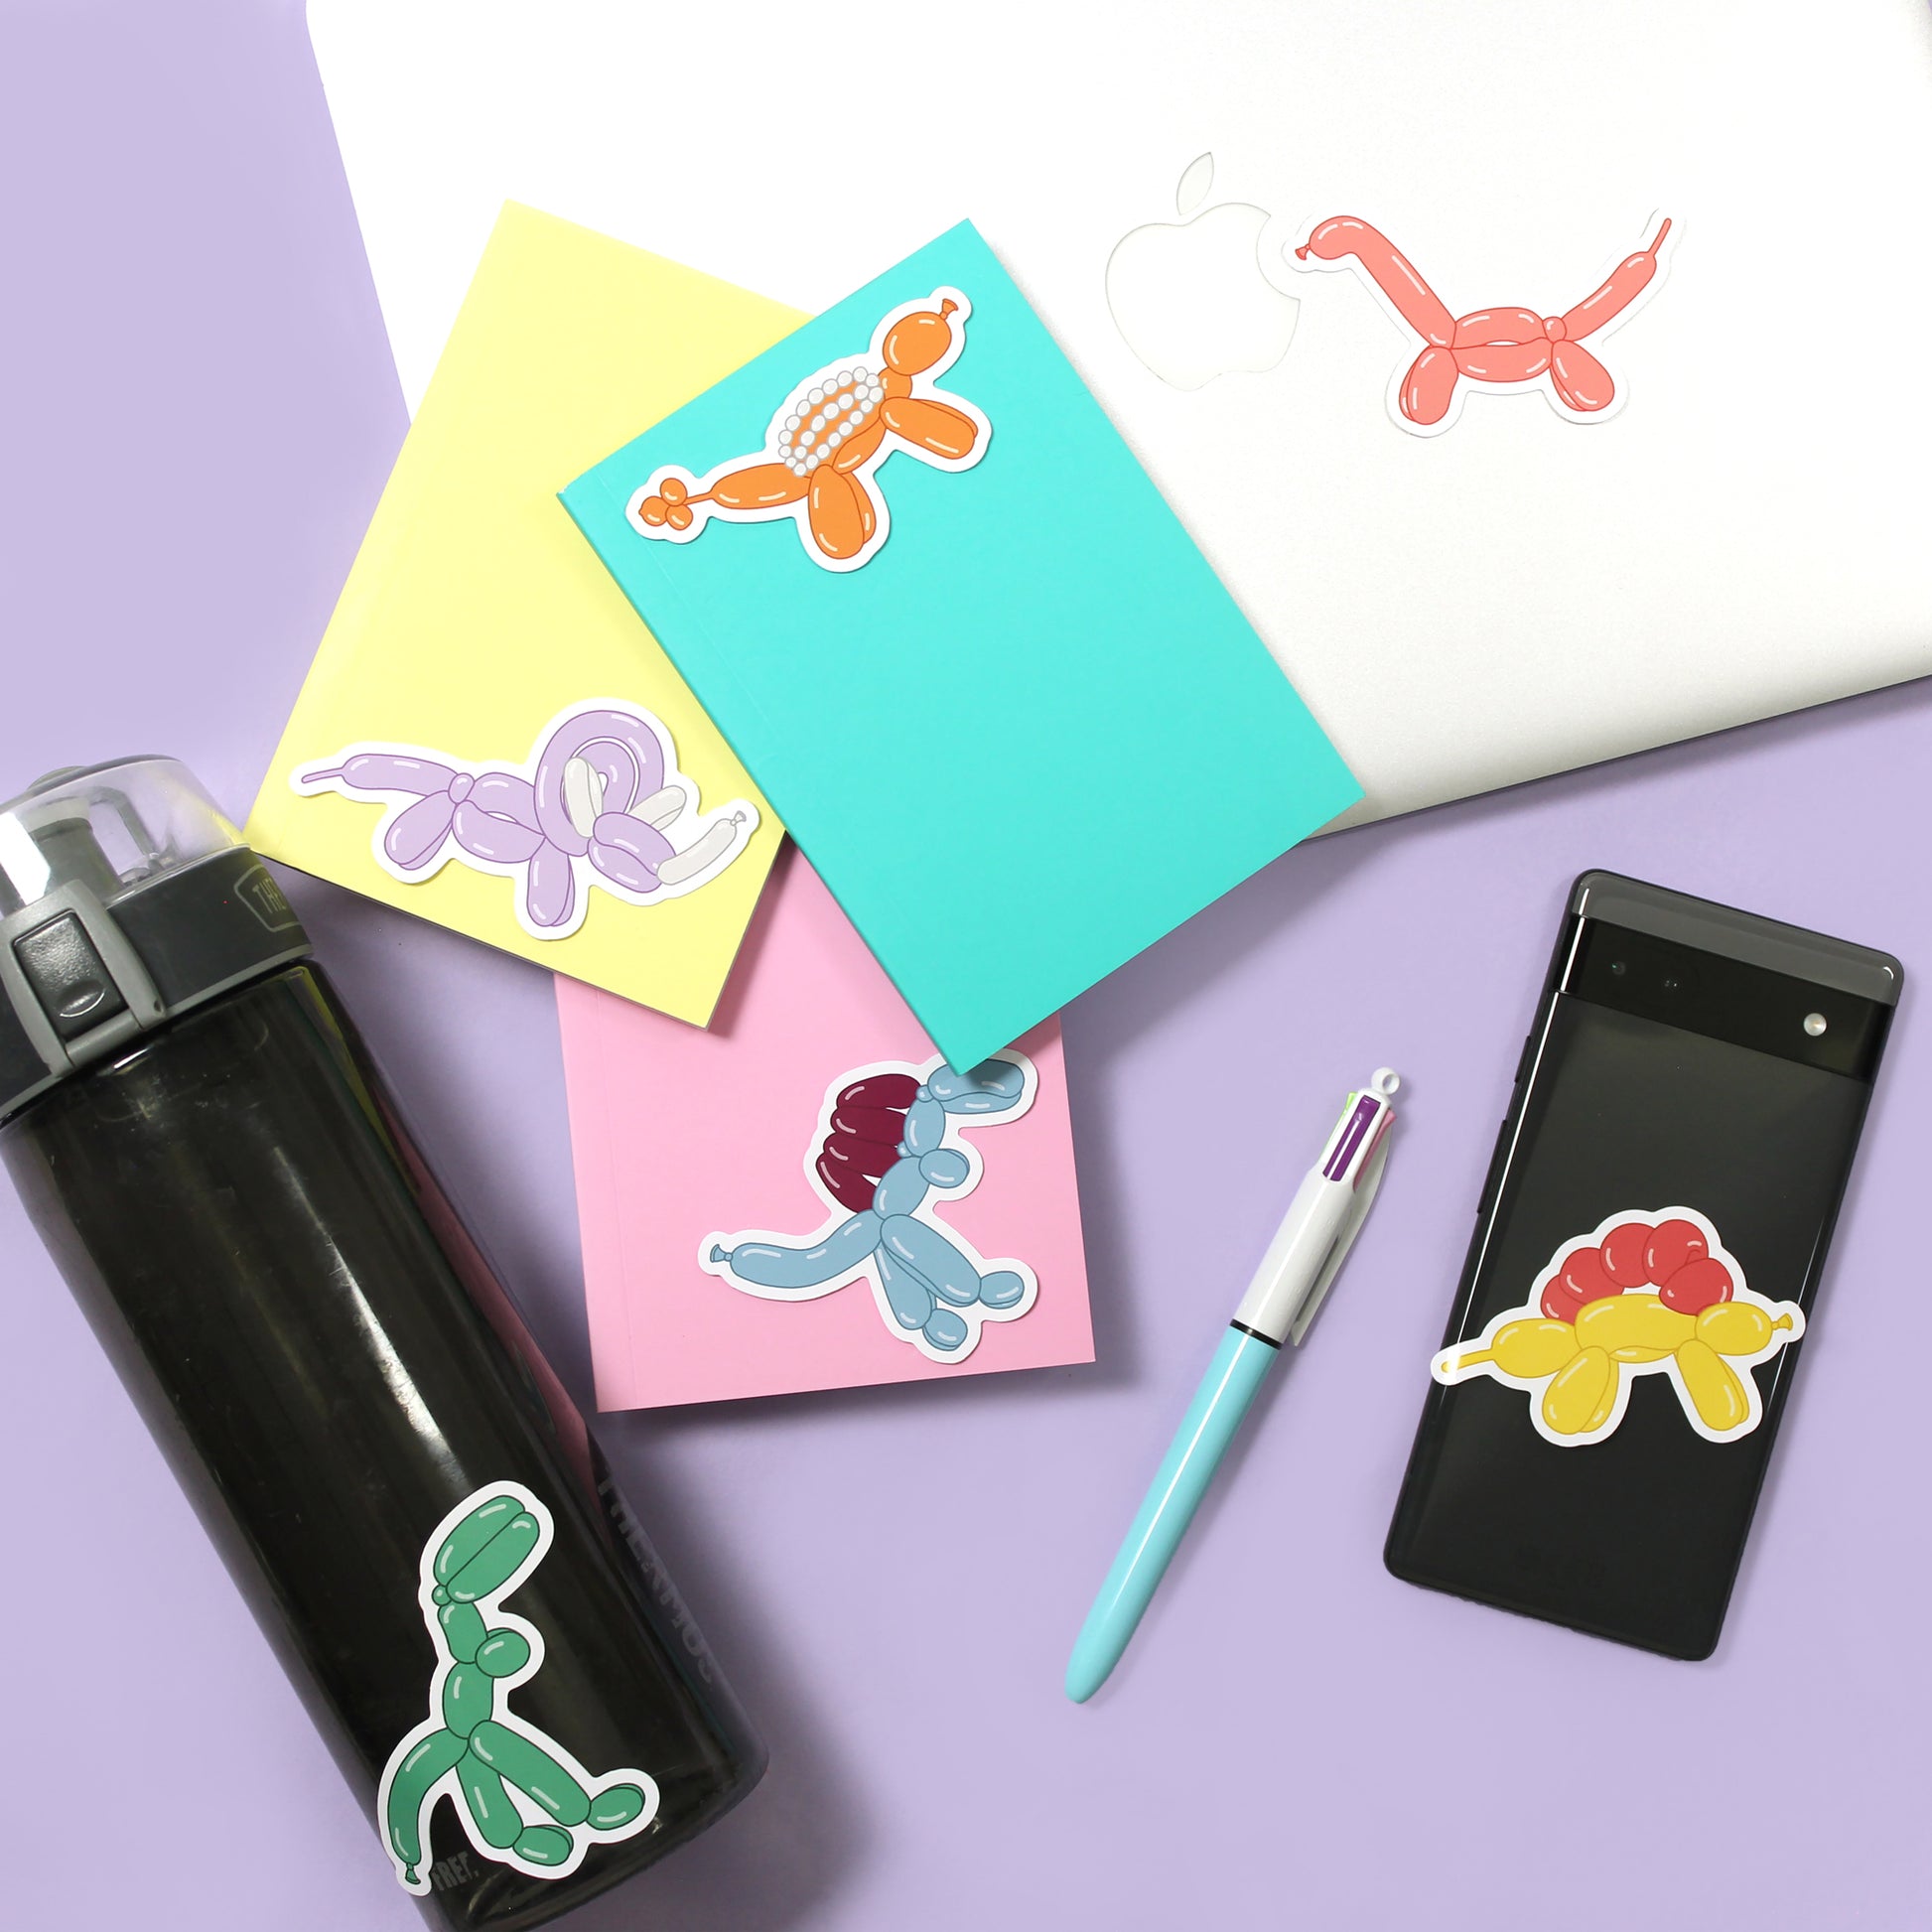 dinosaur balloon animal stickers on different items including a water bottle, notebooks, a laptop and back of a phone.